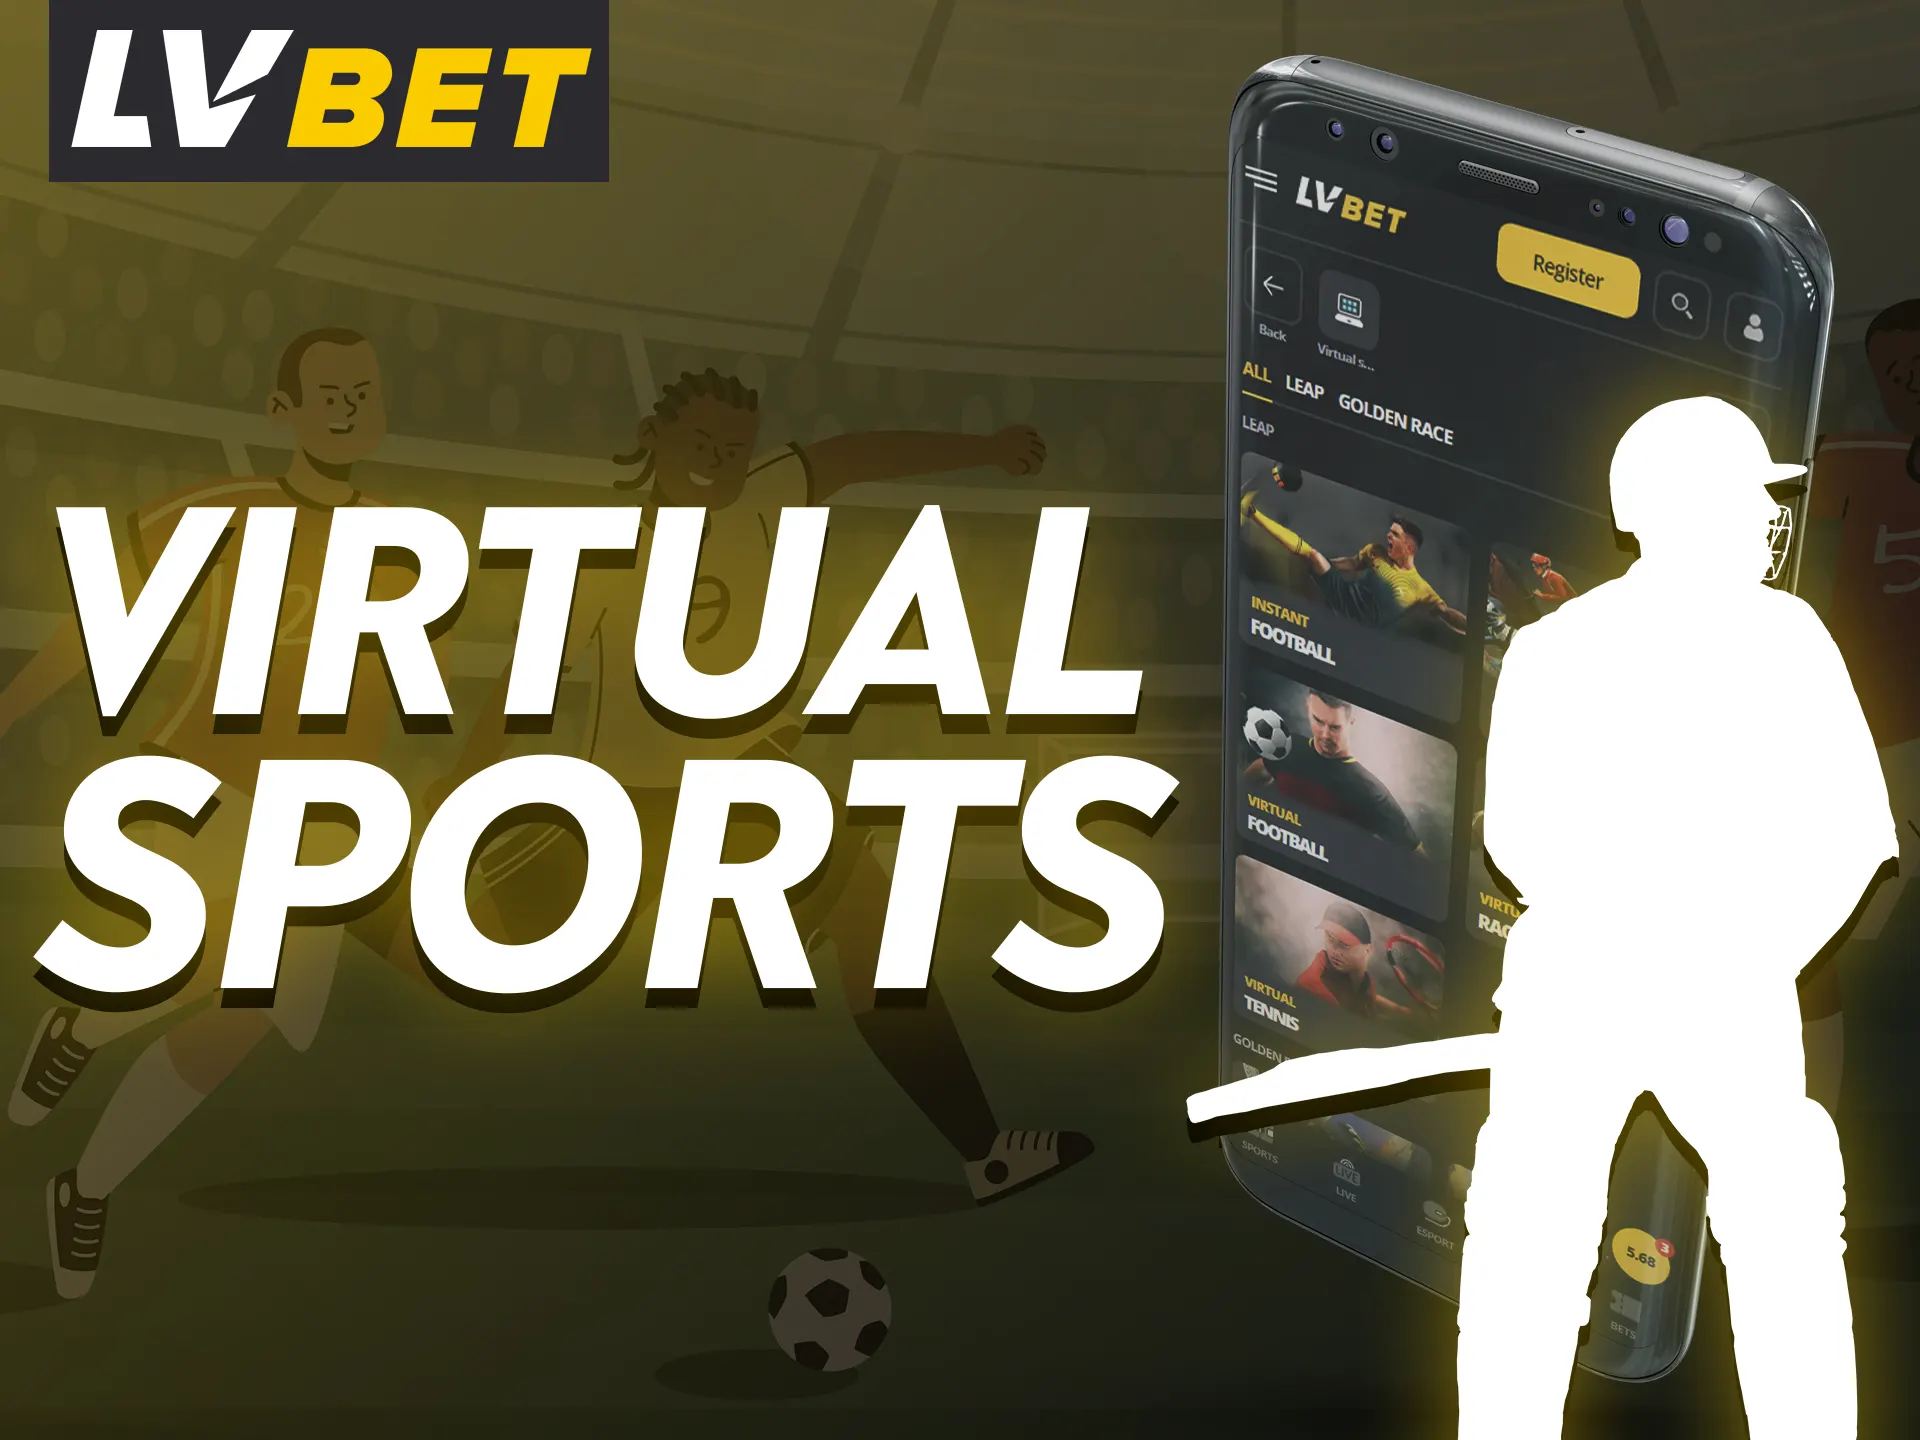 Bet on a variety of virtual sports with LV Bet app.